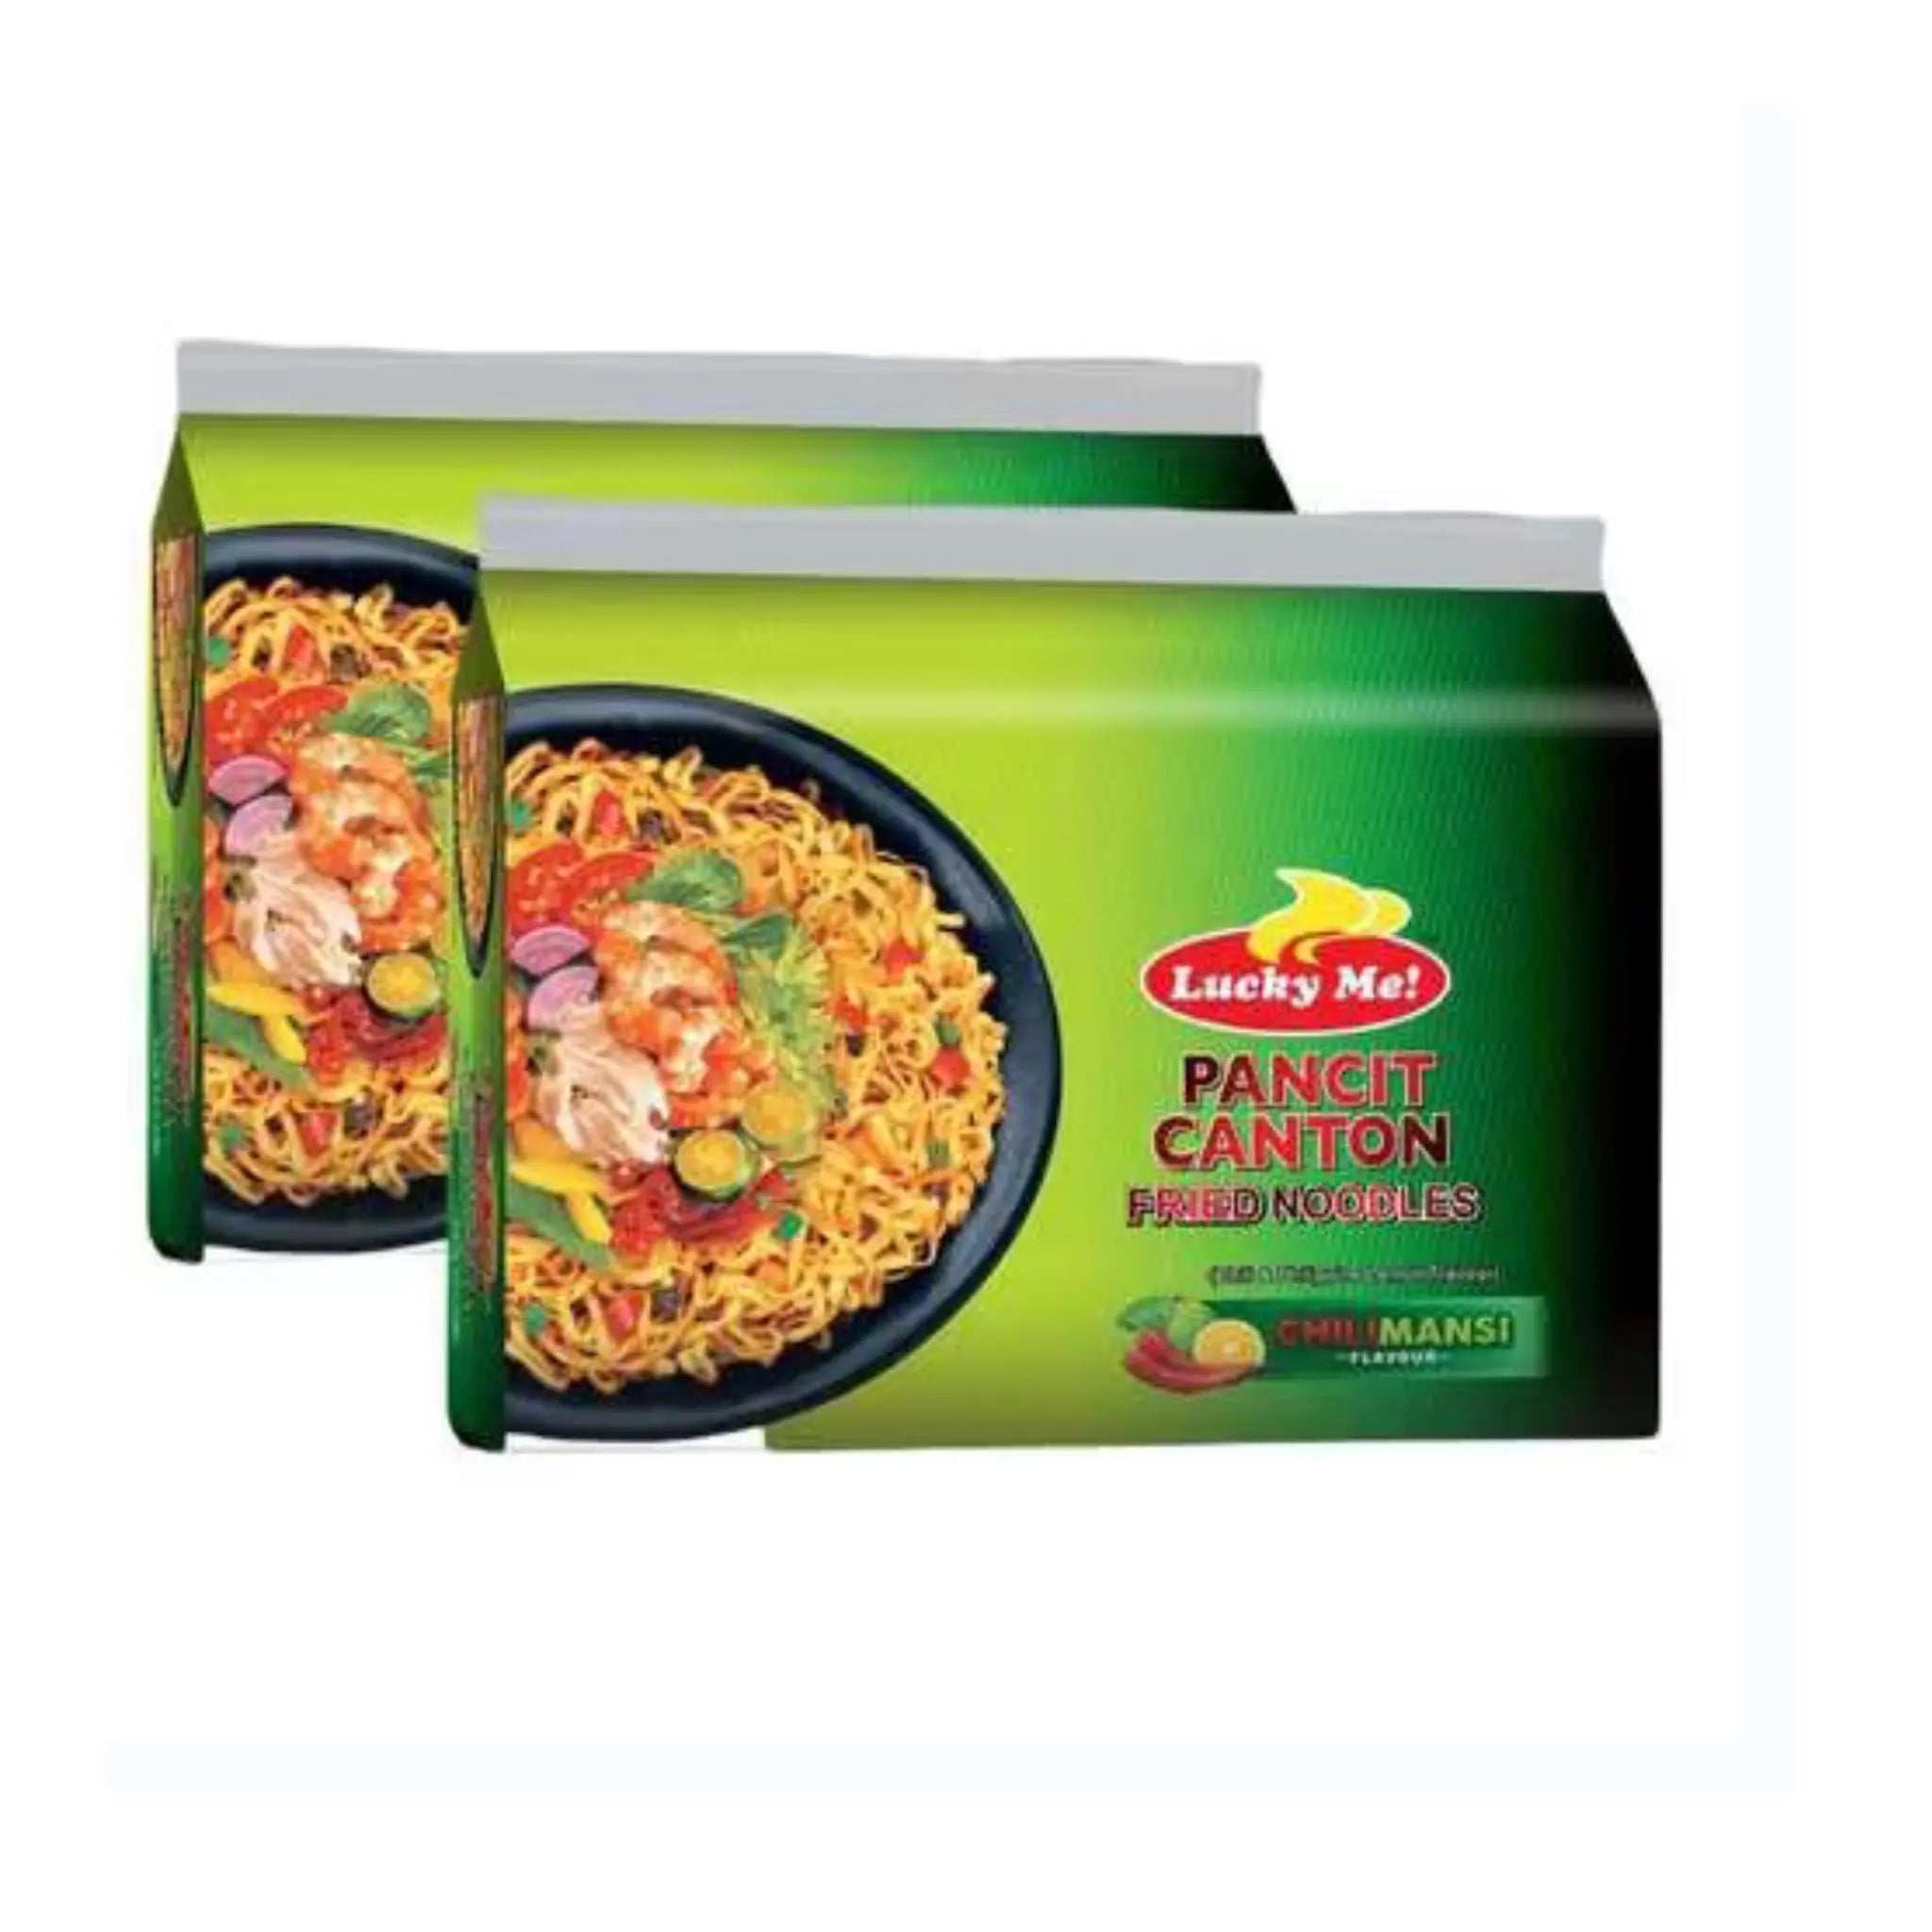 Lucky Me! Pancit Canton Fried Noodles Chilimansi 12 X (6 X 60G) Marino.AE